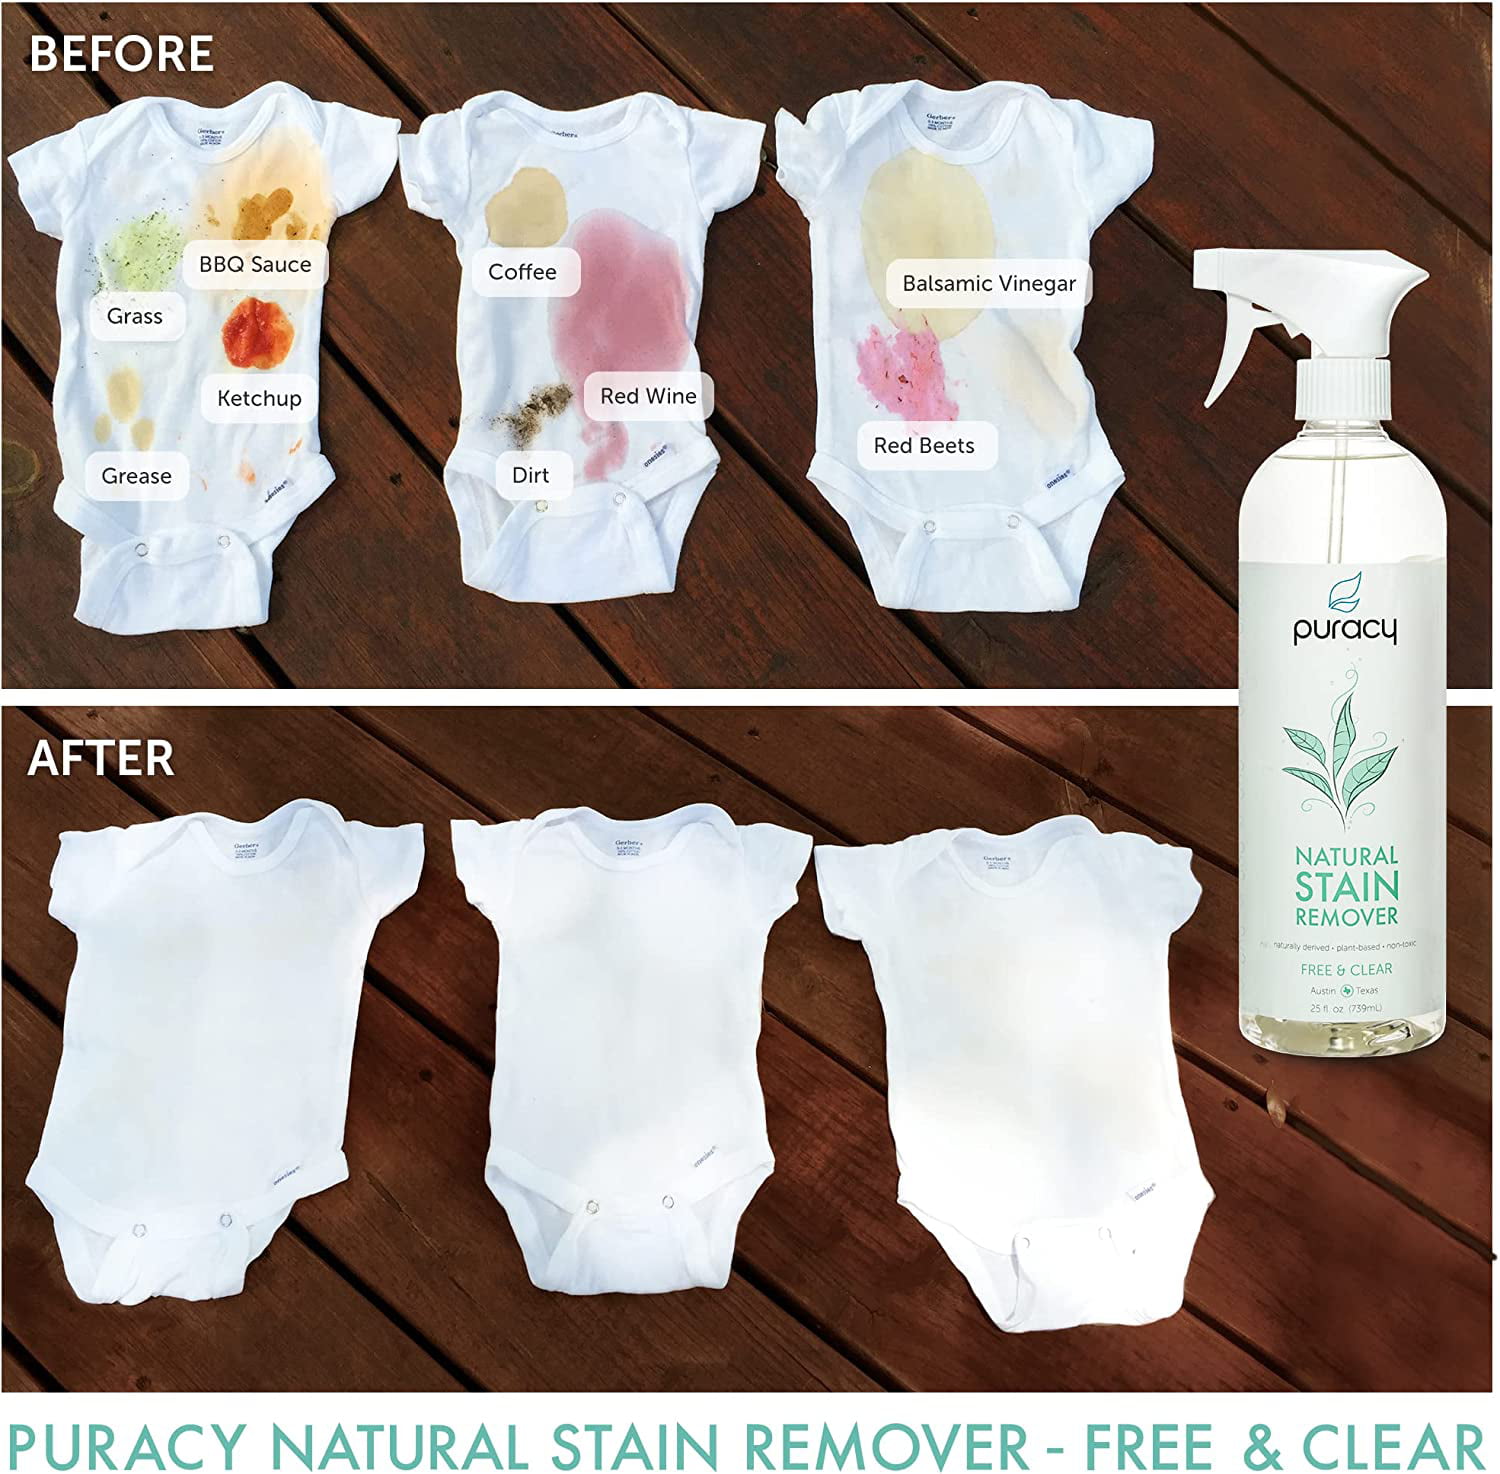 Puracy - Laundry Stain Remover Spray - Natural Spot Cleaner, Free